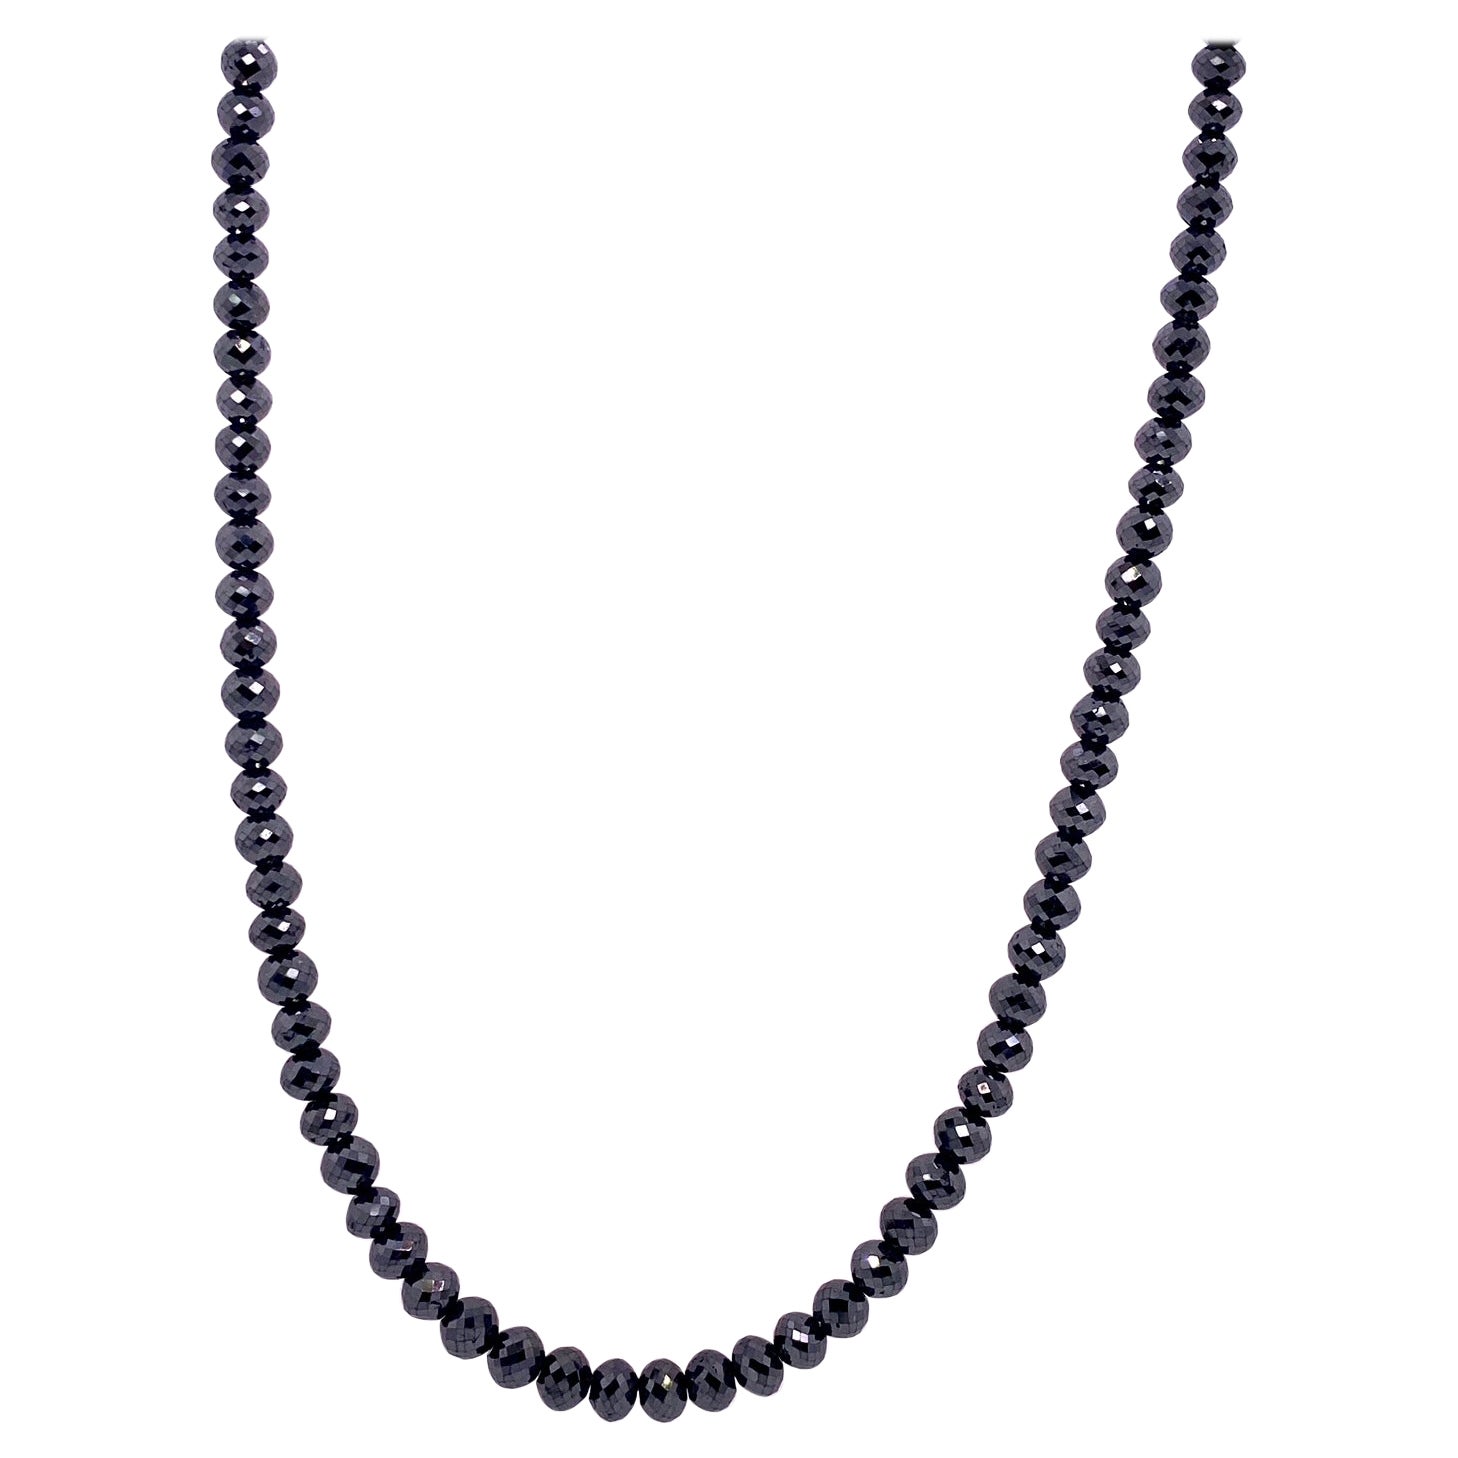 30.95 Carat Faceted Black Diamond Necklace with a White Gold Clasp For Sale